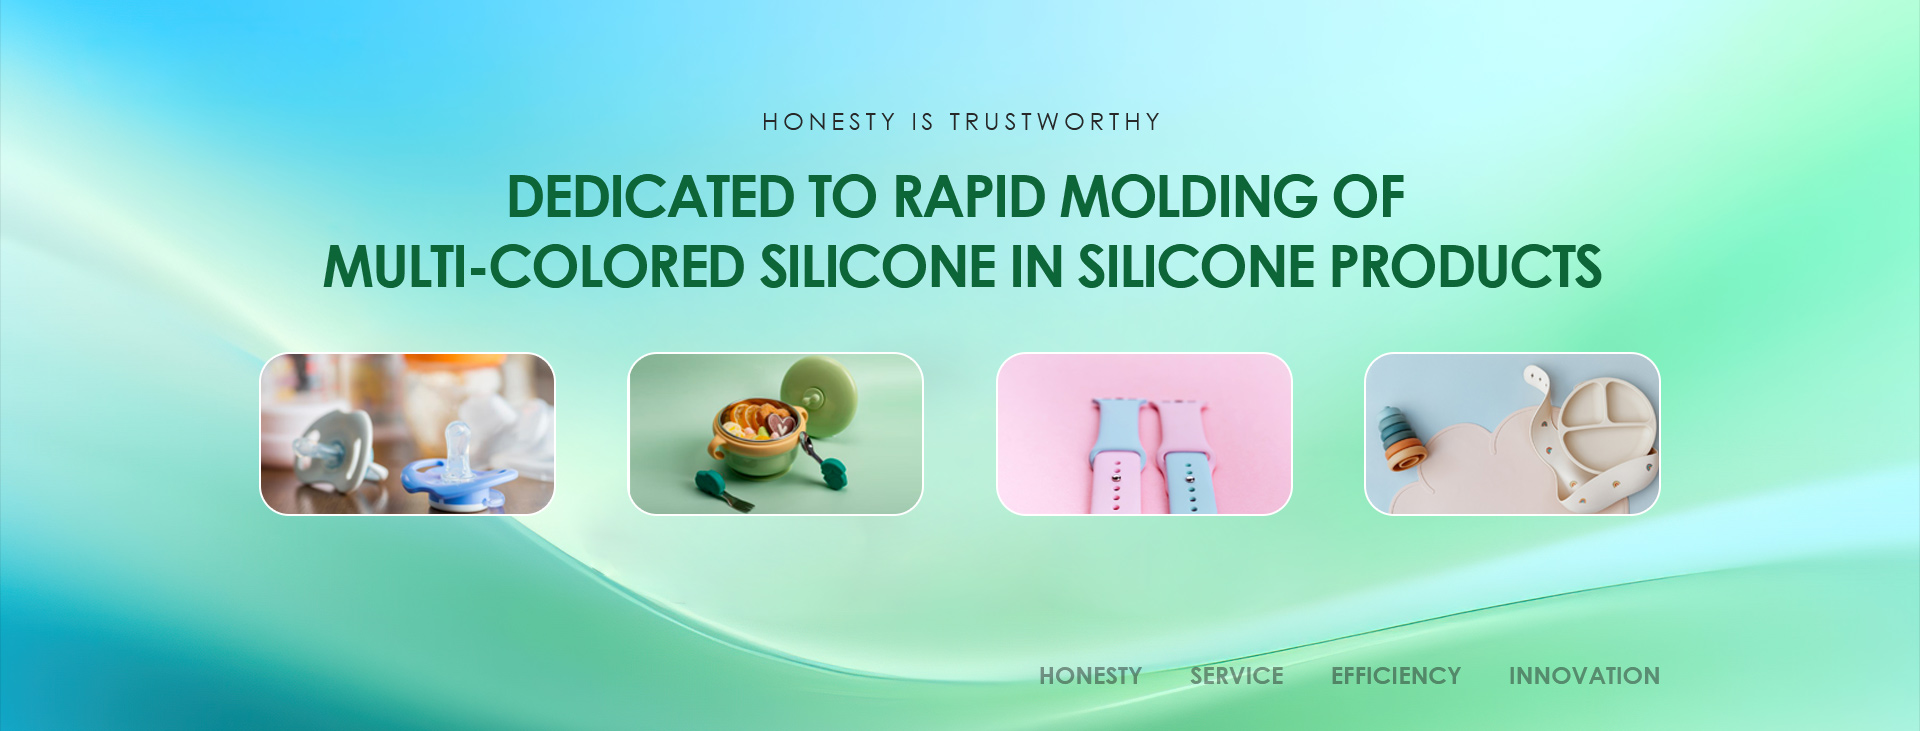 DEDICATED TO THE RAPID MOLDING OF MULTI-COLOR AND SILICONE PRODUCTS